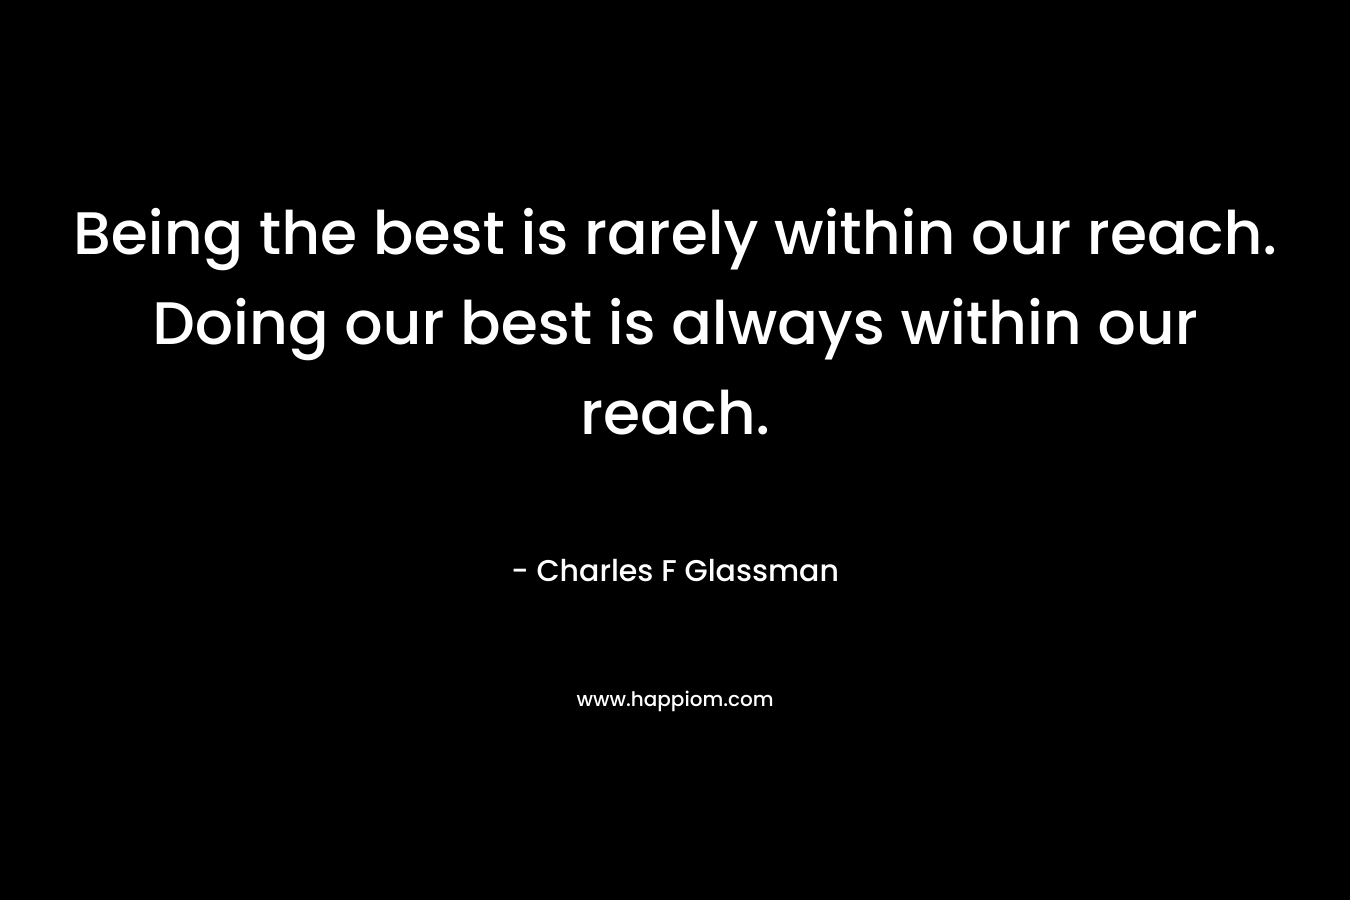 Being the best is rarely within our reach. Doing our best is always within our reach.